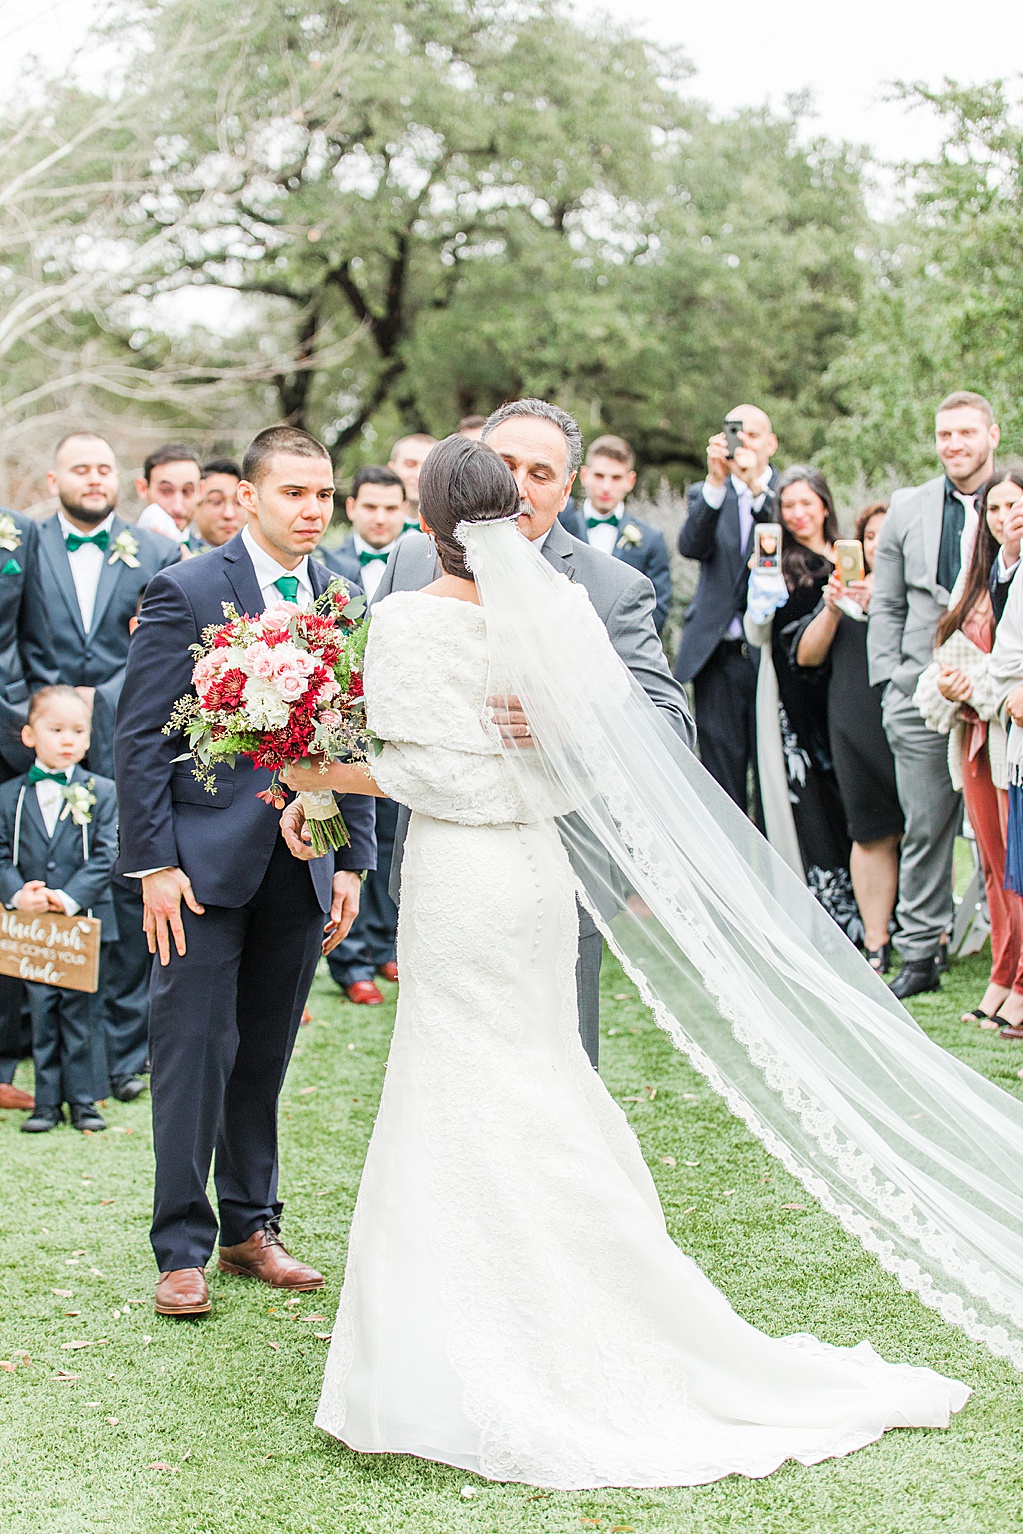 Winter Wedding at Kendall Plantation Hill Country Wedding Venue by Allison Jeffers Photography 0075